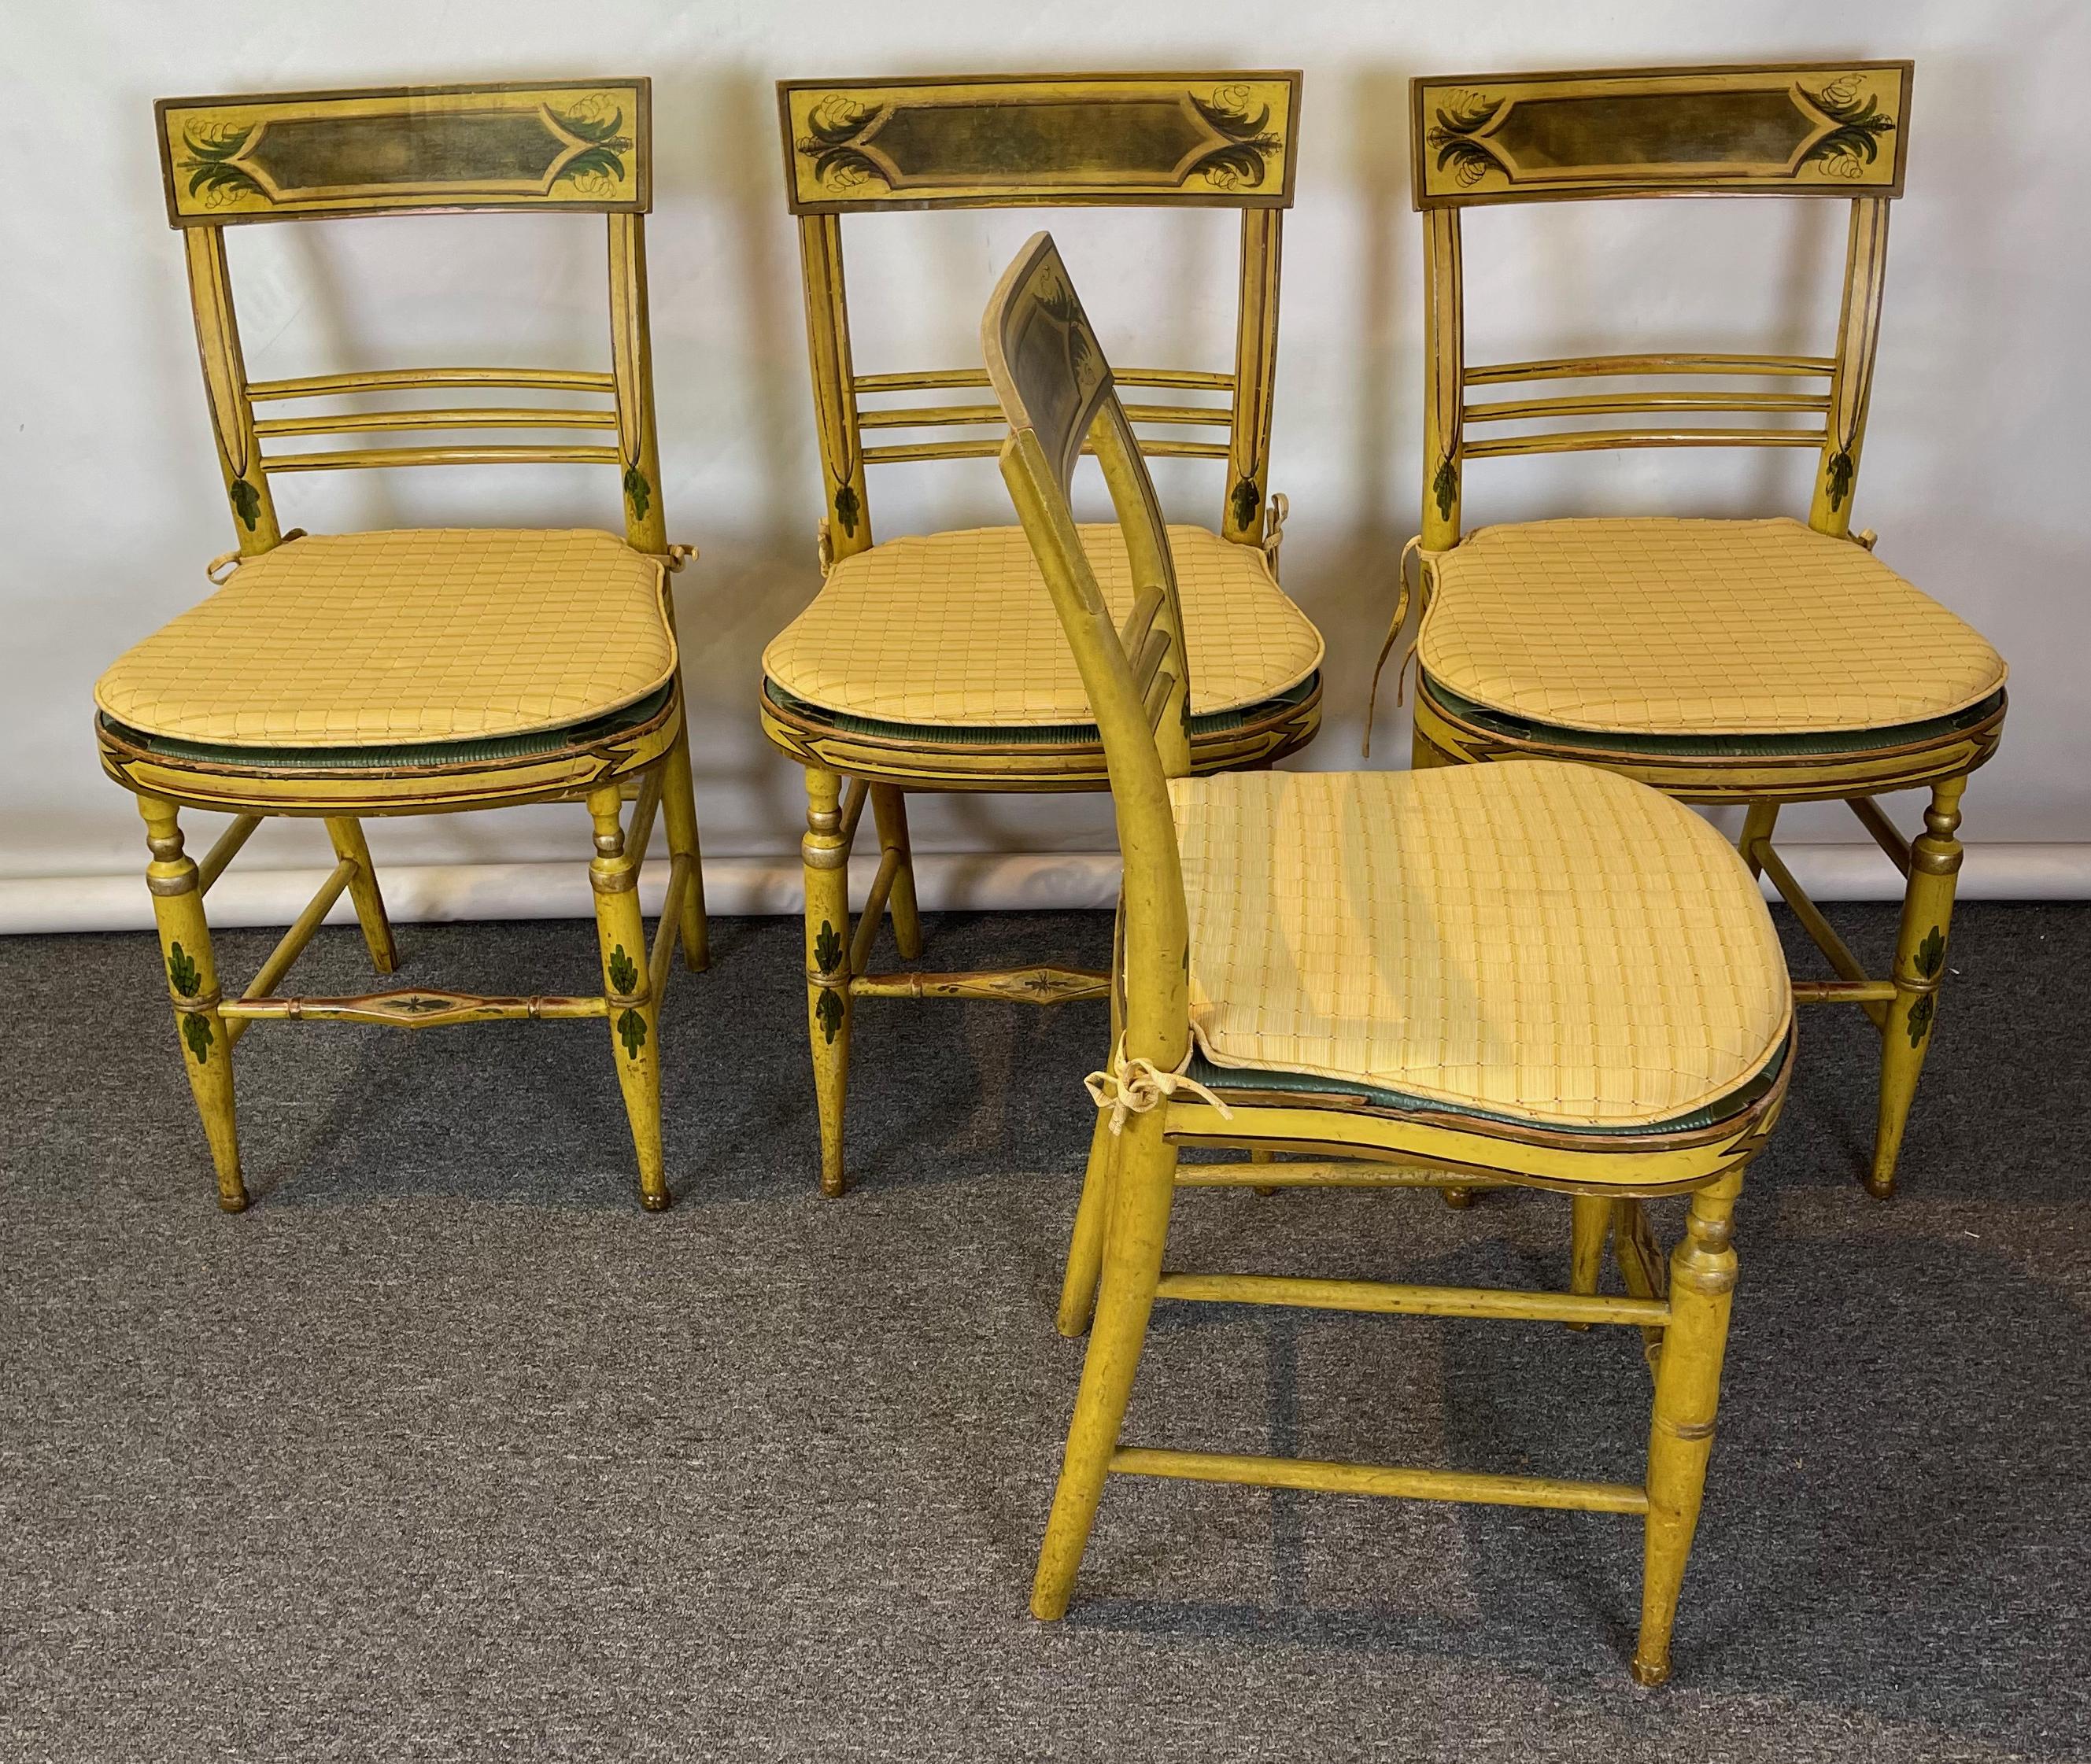 Hand-Crafted Set of Four Early 19th Century American Paint Decorated Fancy Chairs